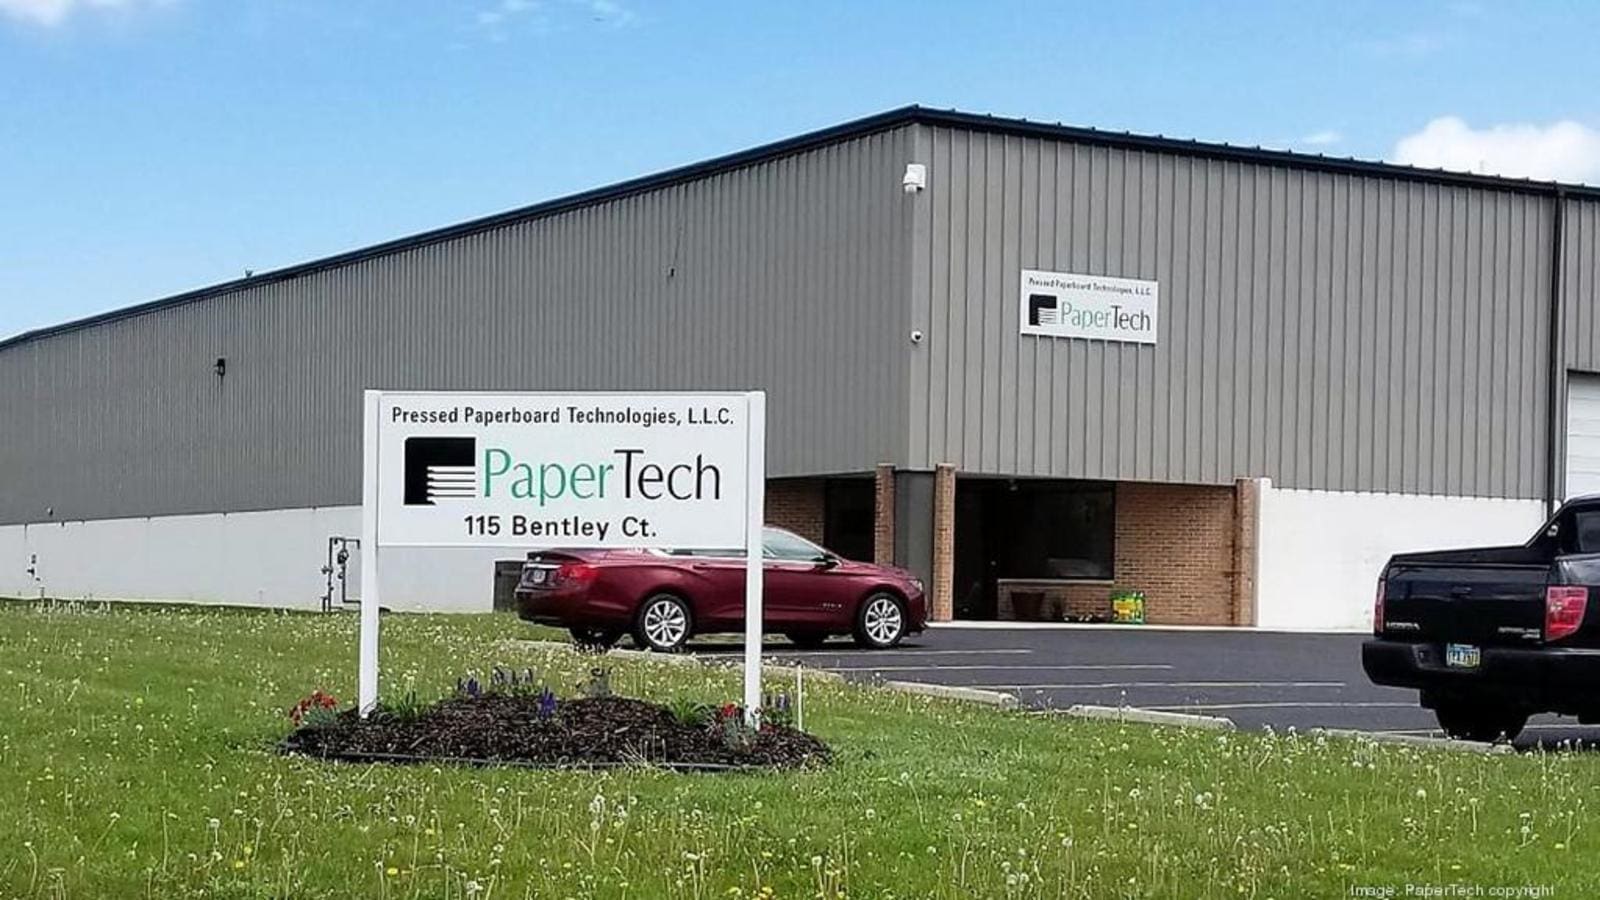 US packaging company PaperTech acquired by May River Capital